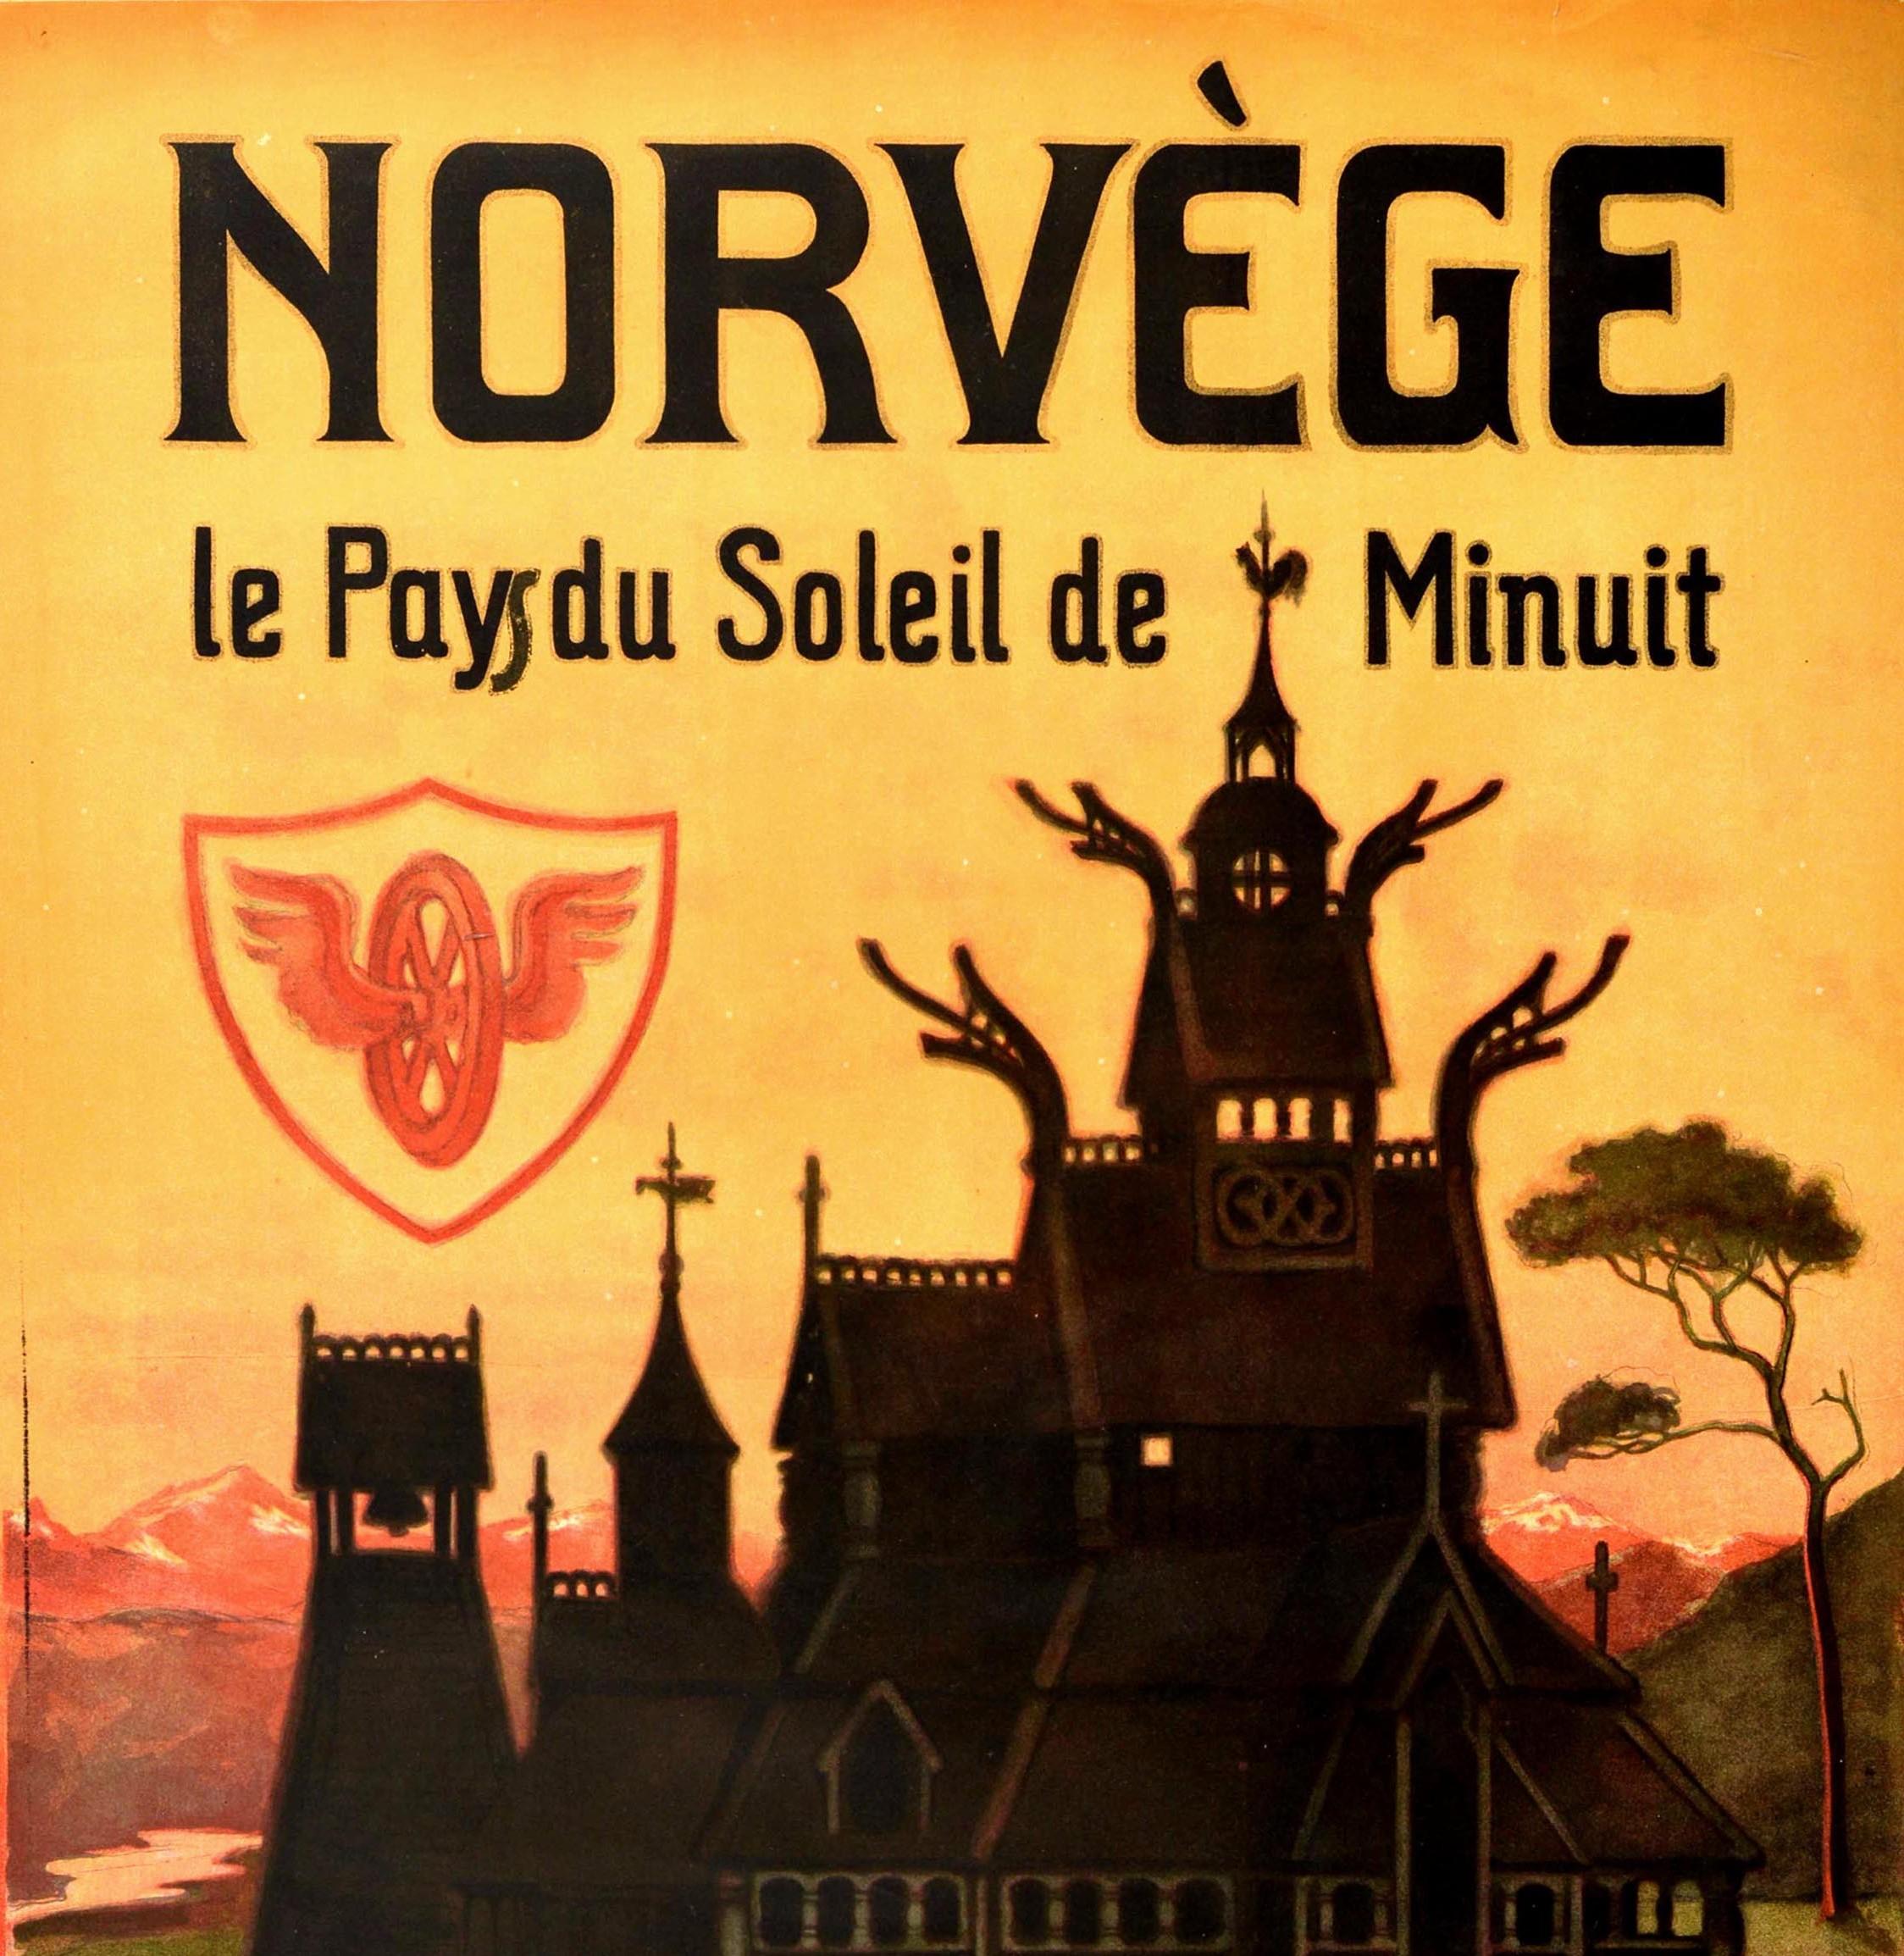 Original antique travel poster for Norway with French text The Land of the Midnight Sun / Norvege le Pays du Soleil de Minuit featuring great artwork by Othar Holmboe (1868-1928) depicting a traditional wooden Norwegian Stavkirke church with snow